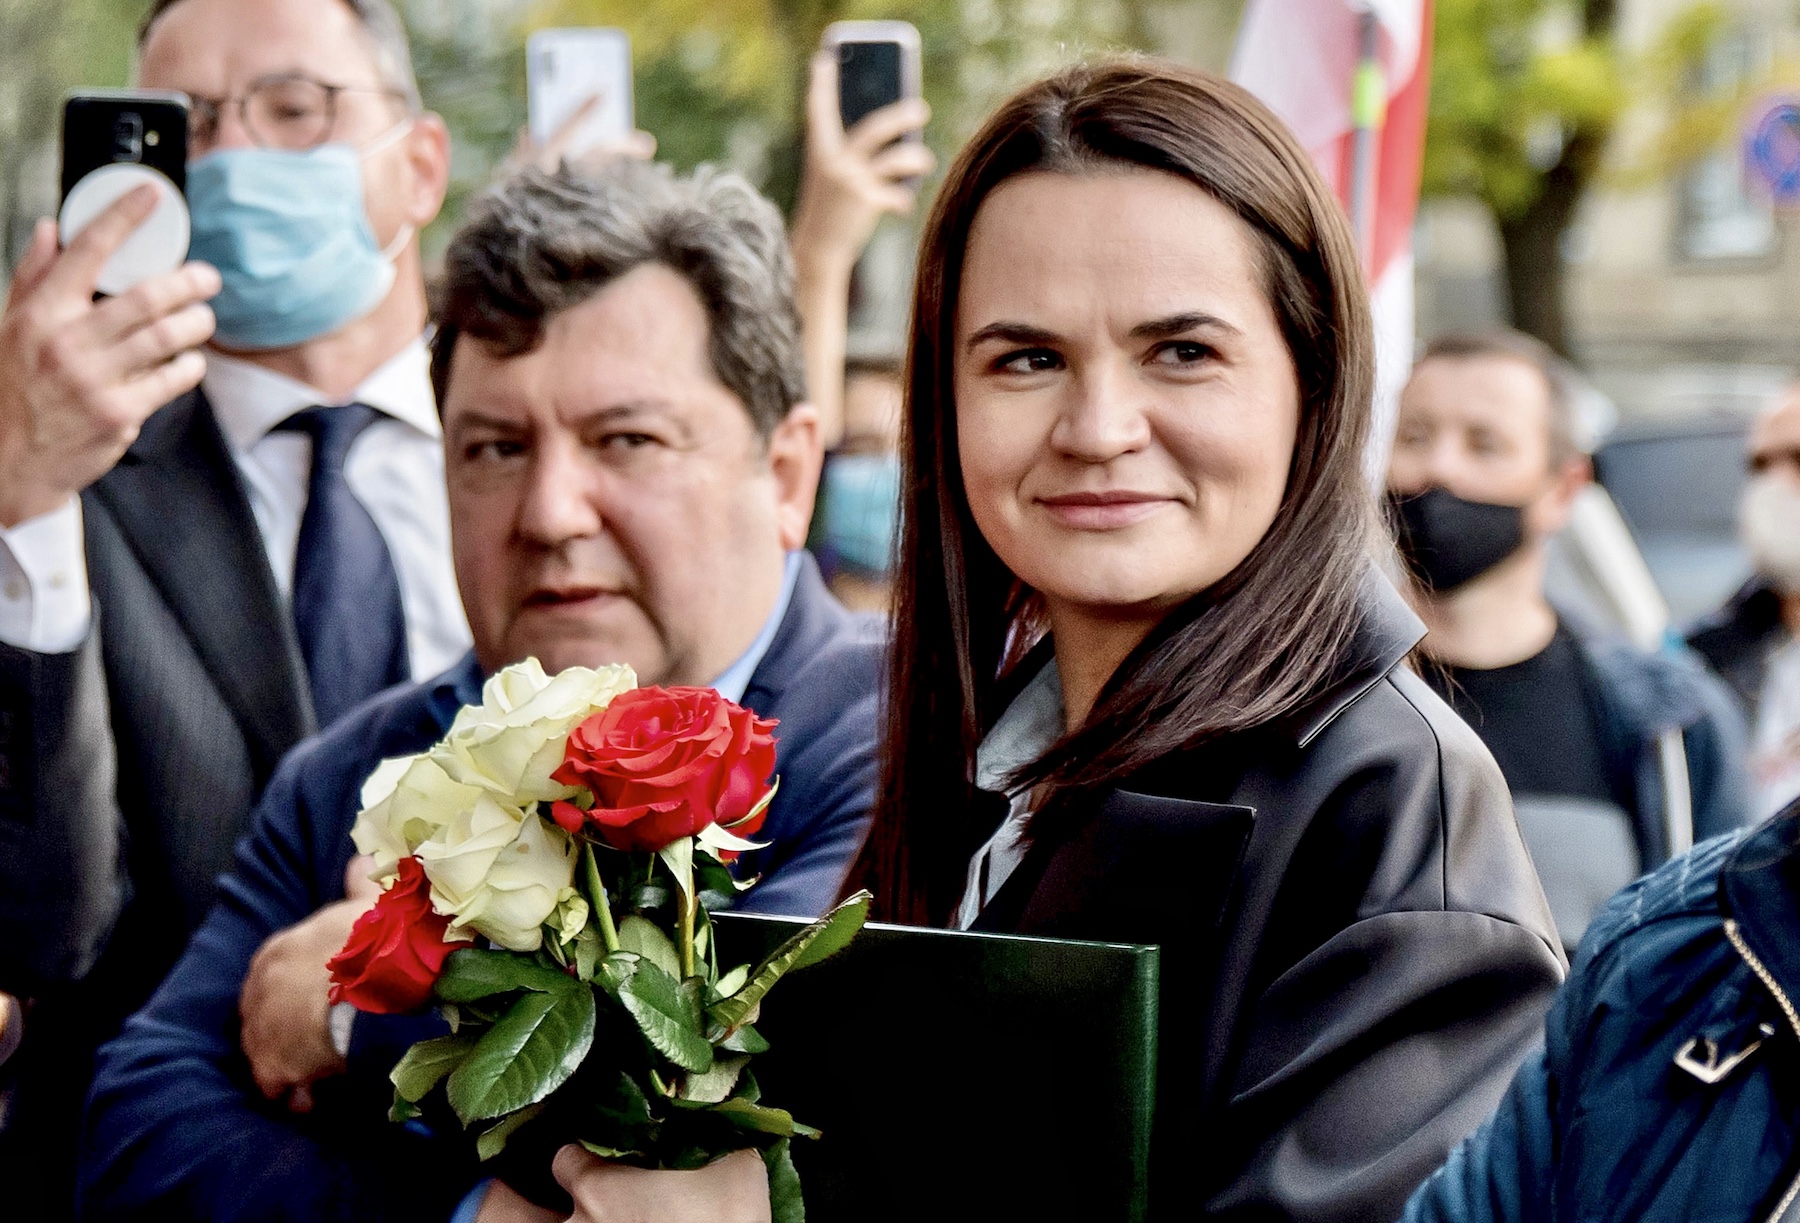 Belarus Has Sentenced Its Exiled Main Woman Opposition Leader To 15 Years In Prison For “Treason”